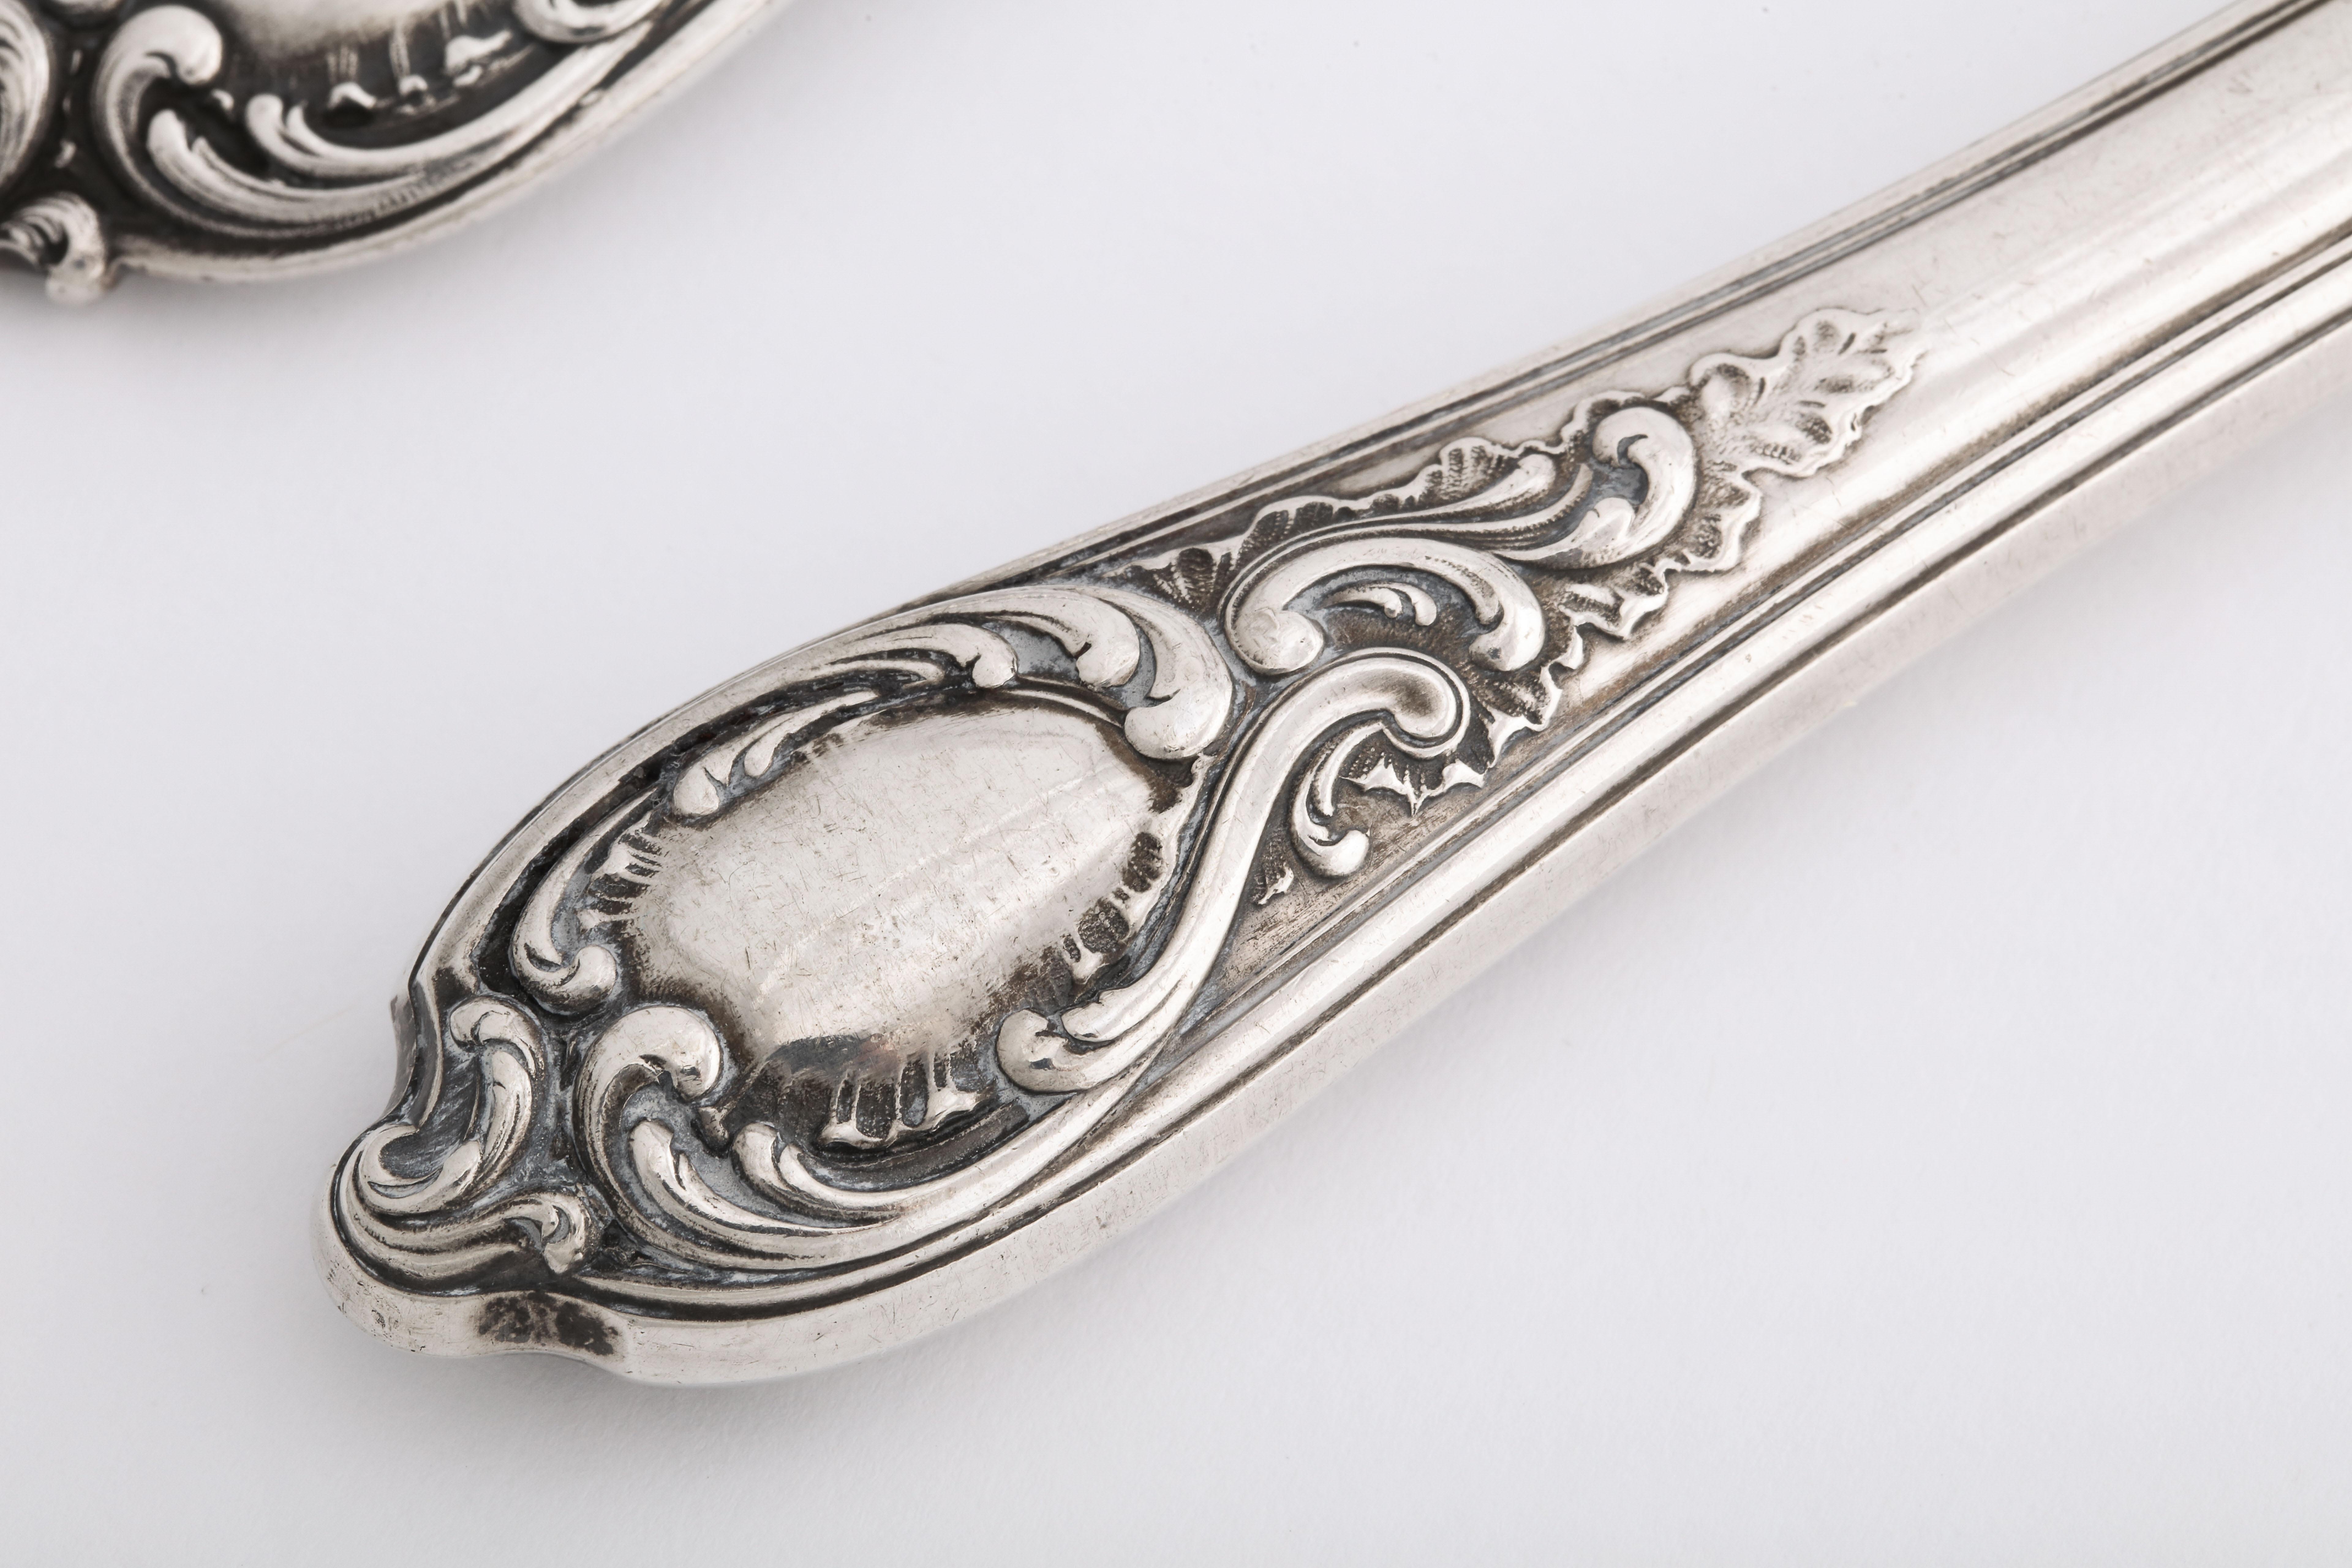 Russian Imperial-Era Fabergé Silver Dinner Knife and Fork, Moscow, Circa 1900 For Sale 2